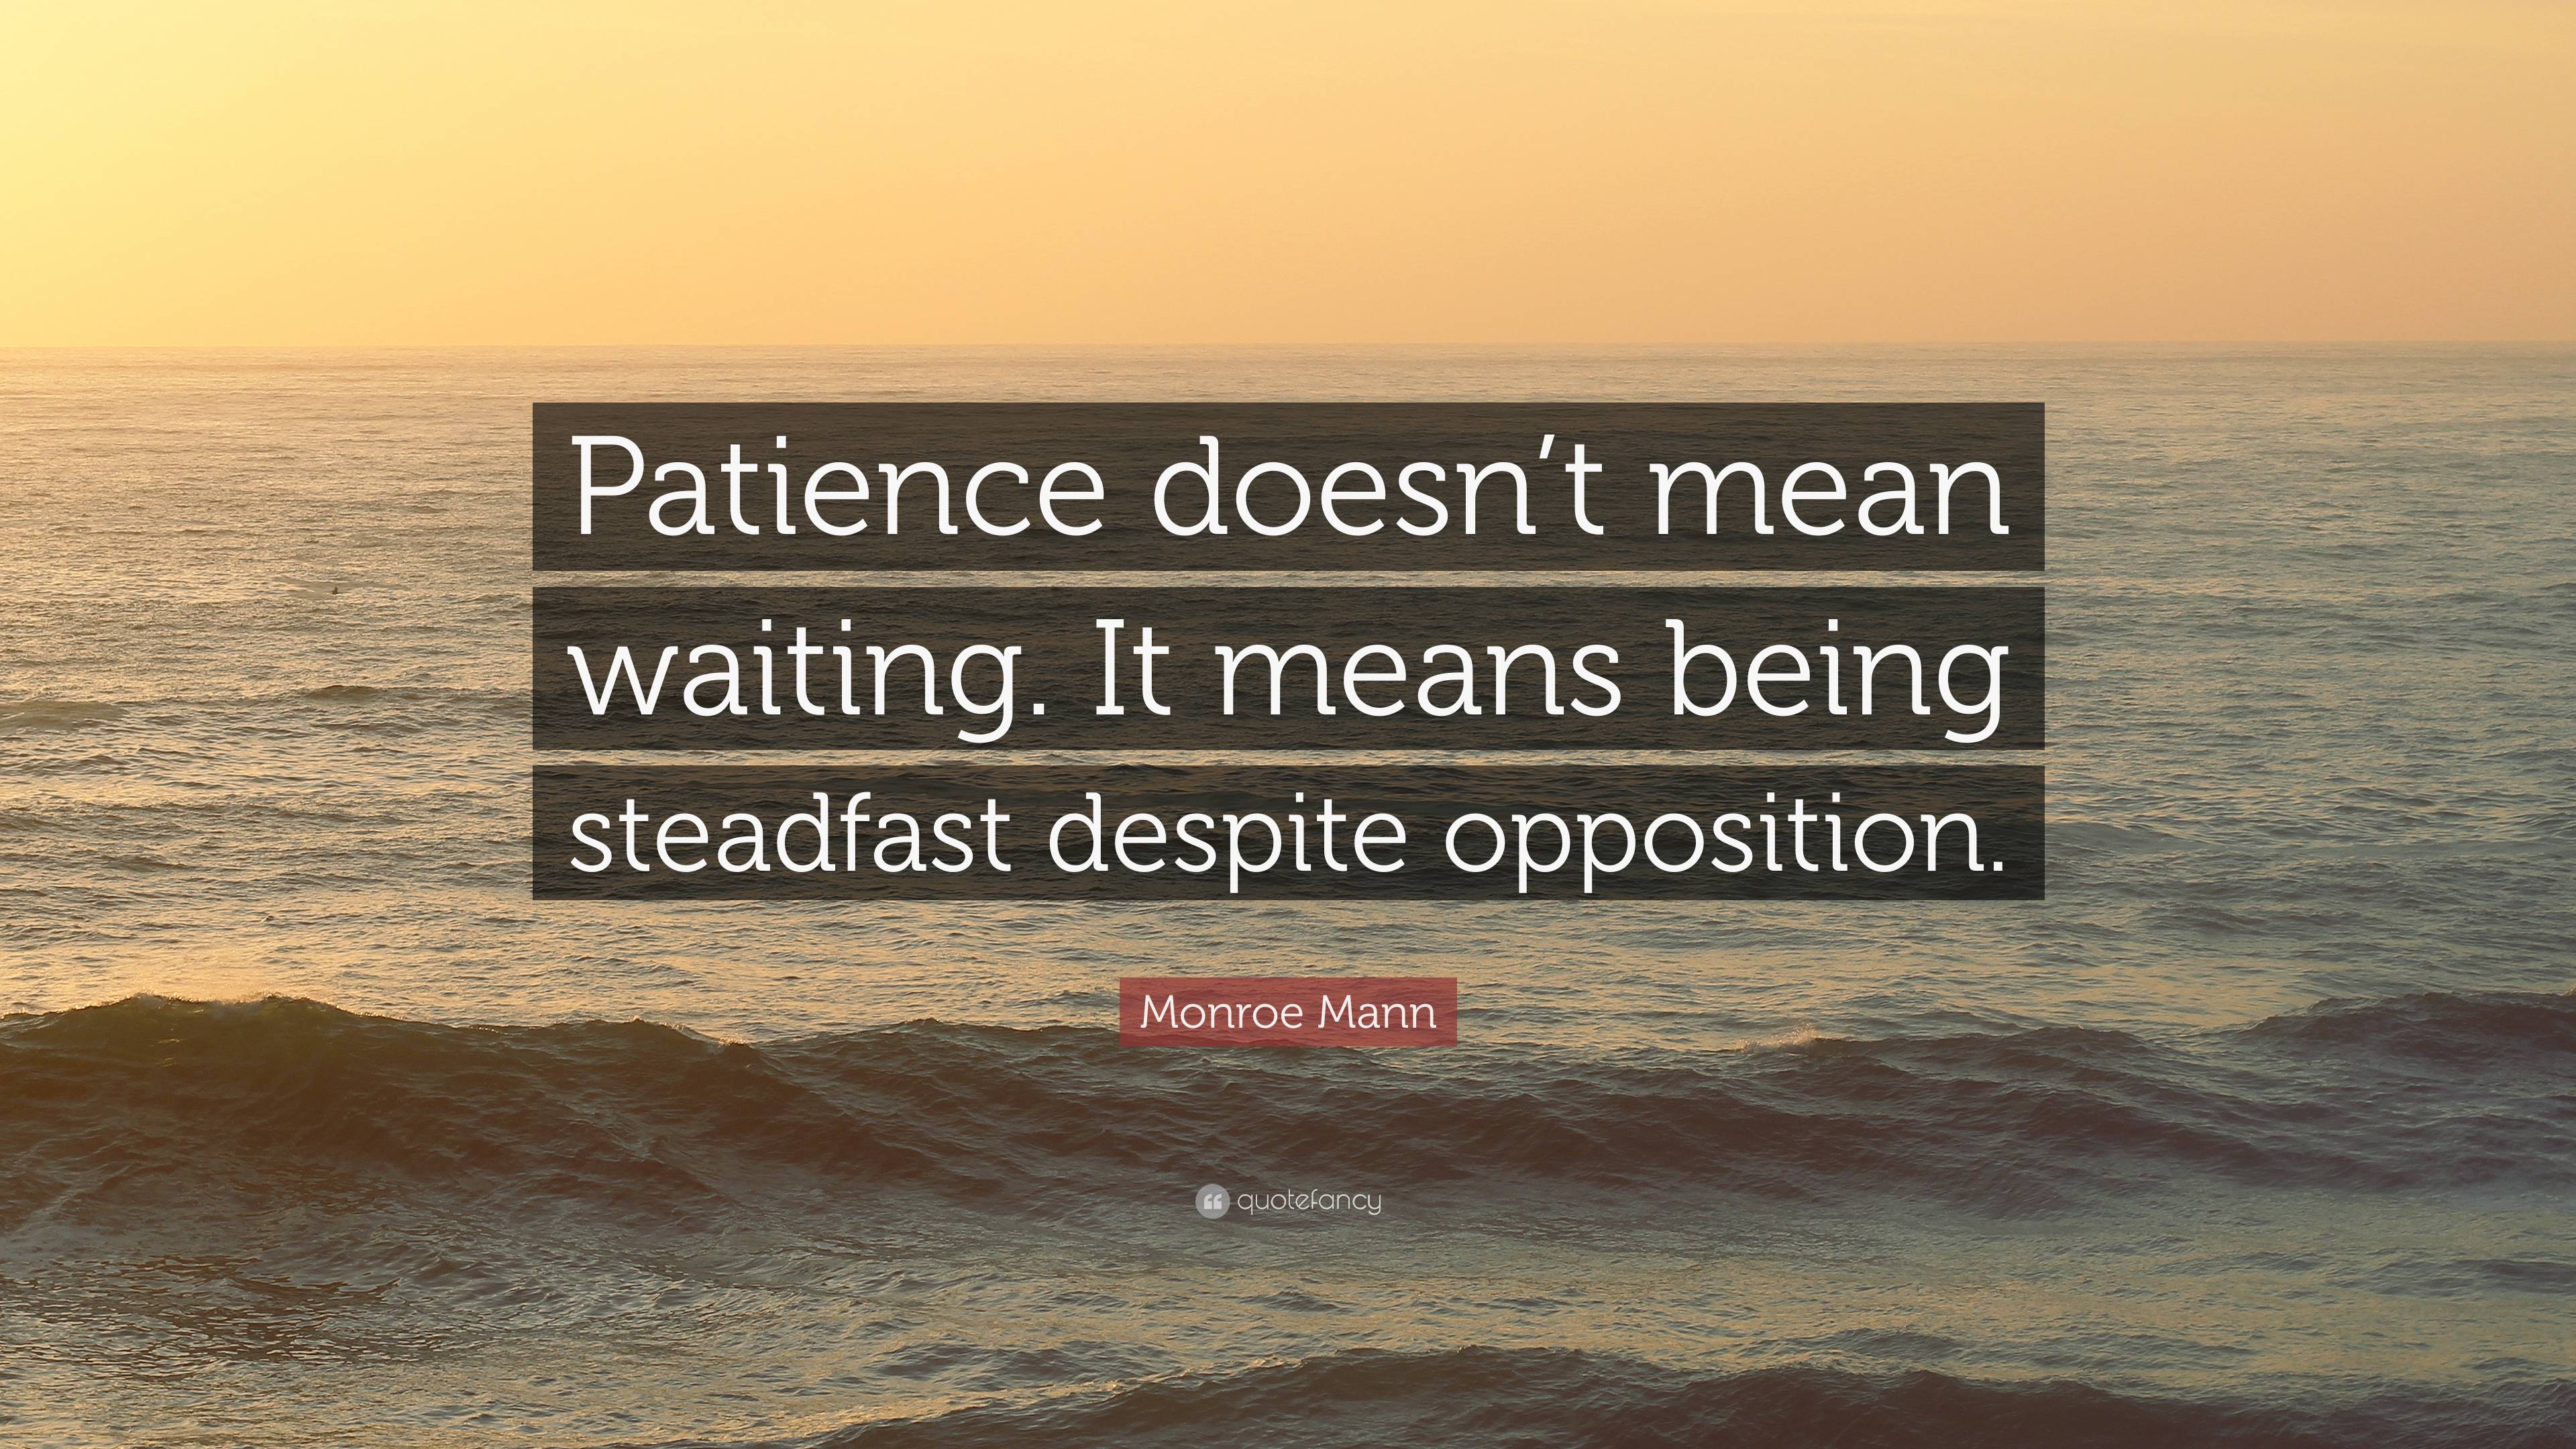 Monroe Mann Quote: “Patience doesn't mean waiting. It means being steadfast  despite opposition.”